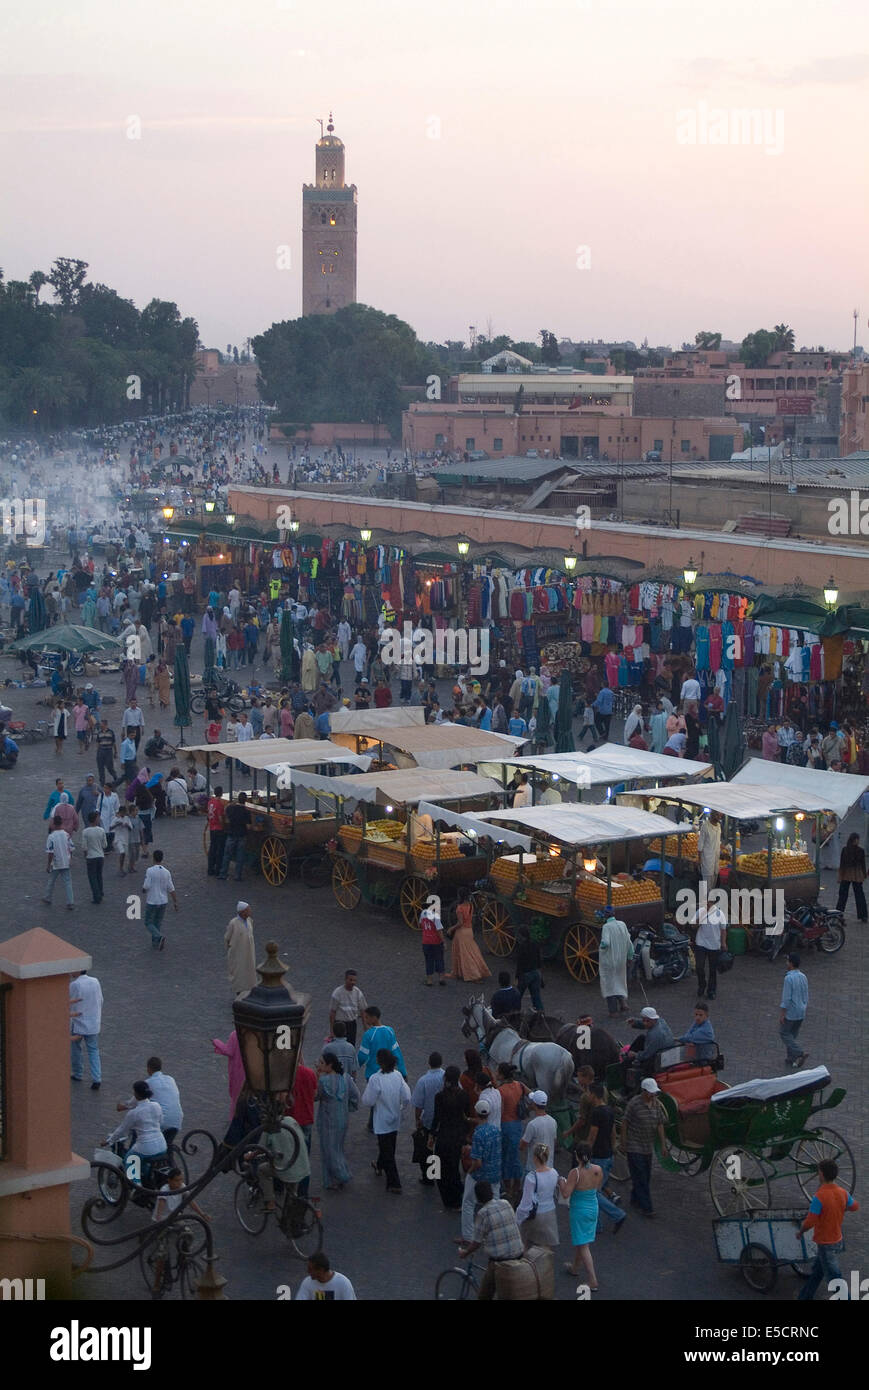 Dusk at the Jemaa el Fna, city square, UNESCO World Heritage site, Marrakech, Morocco Stock Photo